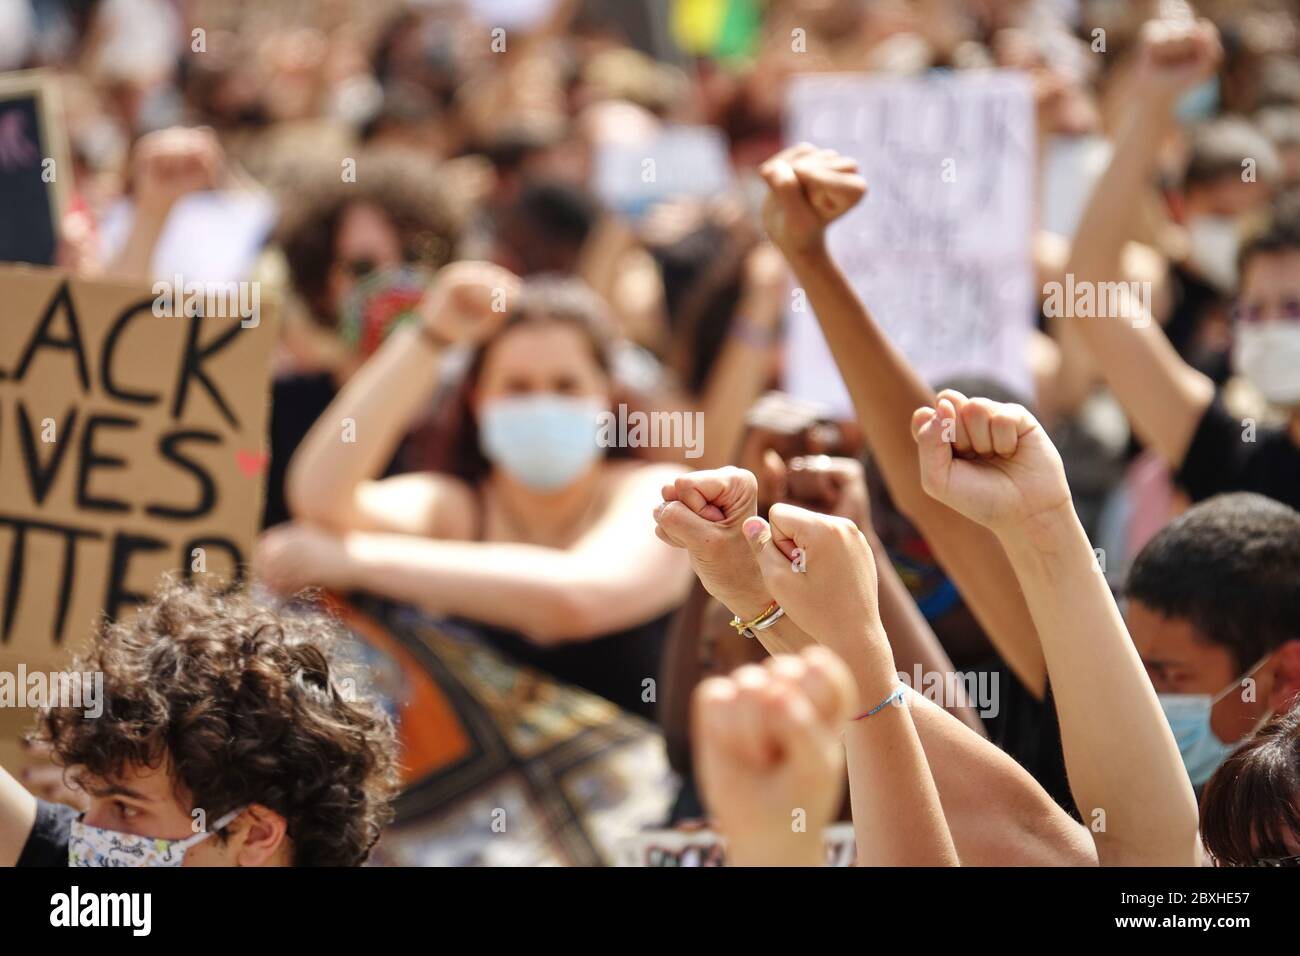 Peaceful protesters demonstrate against the death of George Floyd and all racial discrimination. Turin, Italy - June 2020 Stock Photo